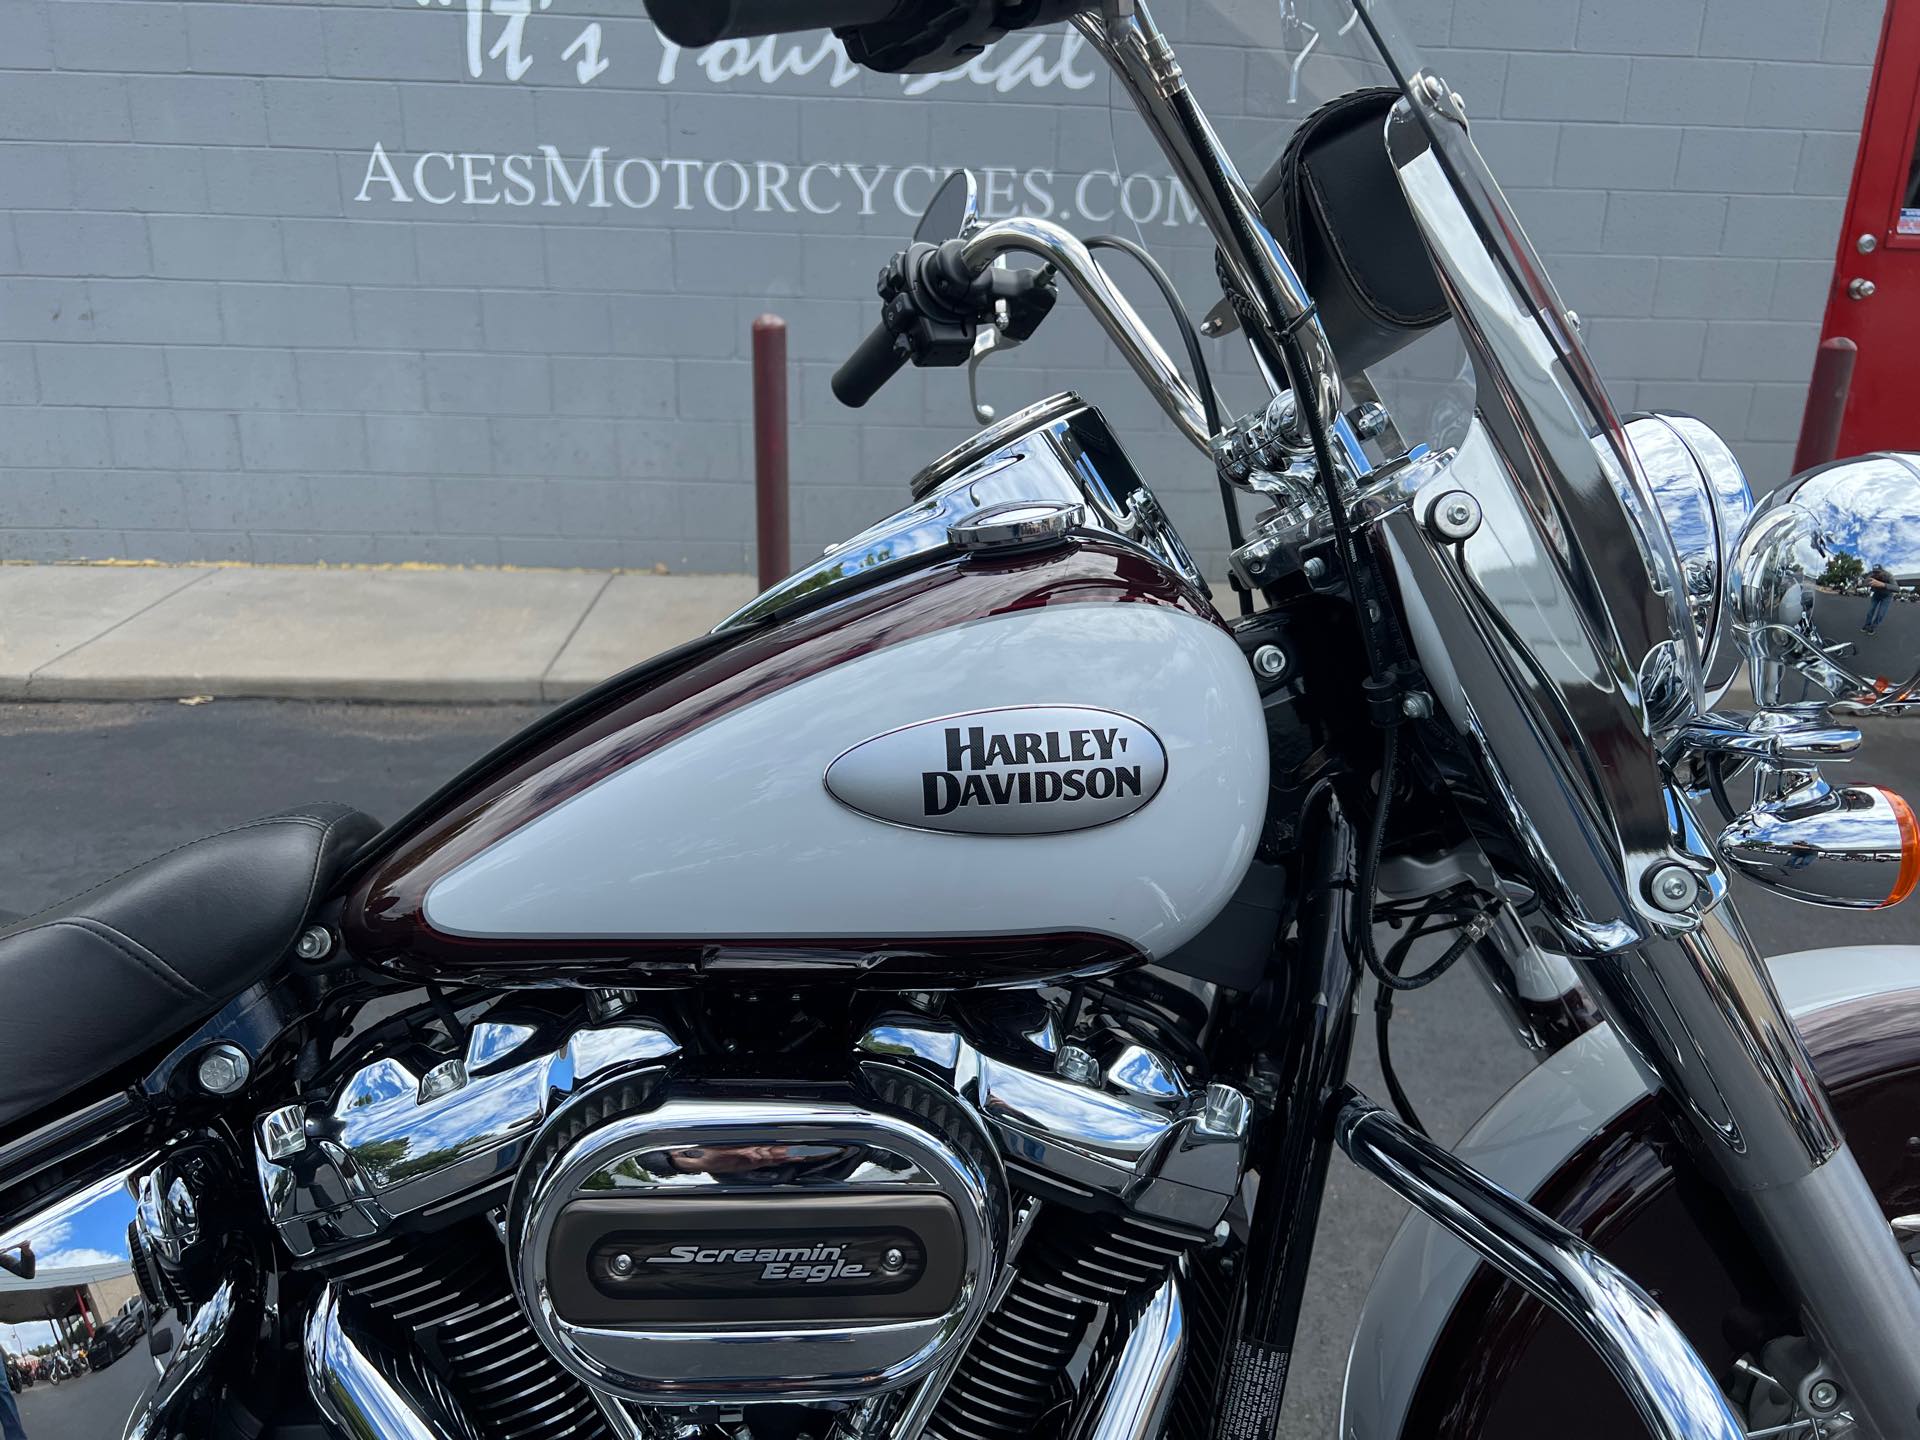 2021 Harley-Davidson Heritage Classic Heritage Classic at Aces Motorcycles - Fort Collins